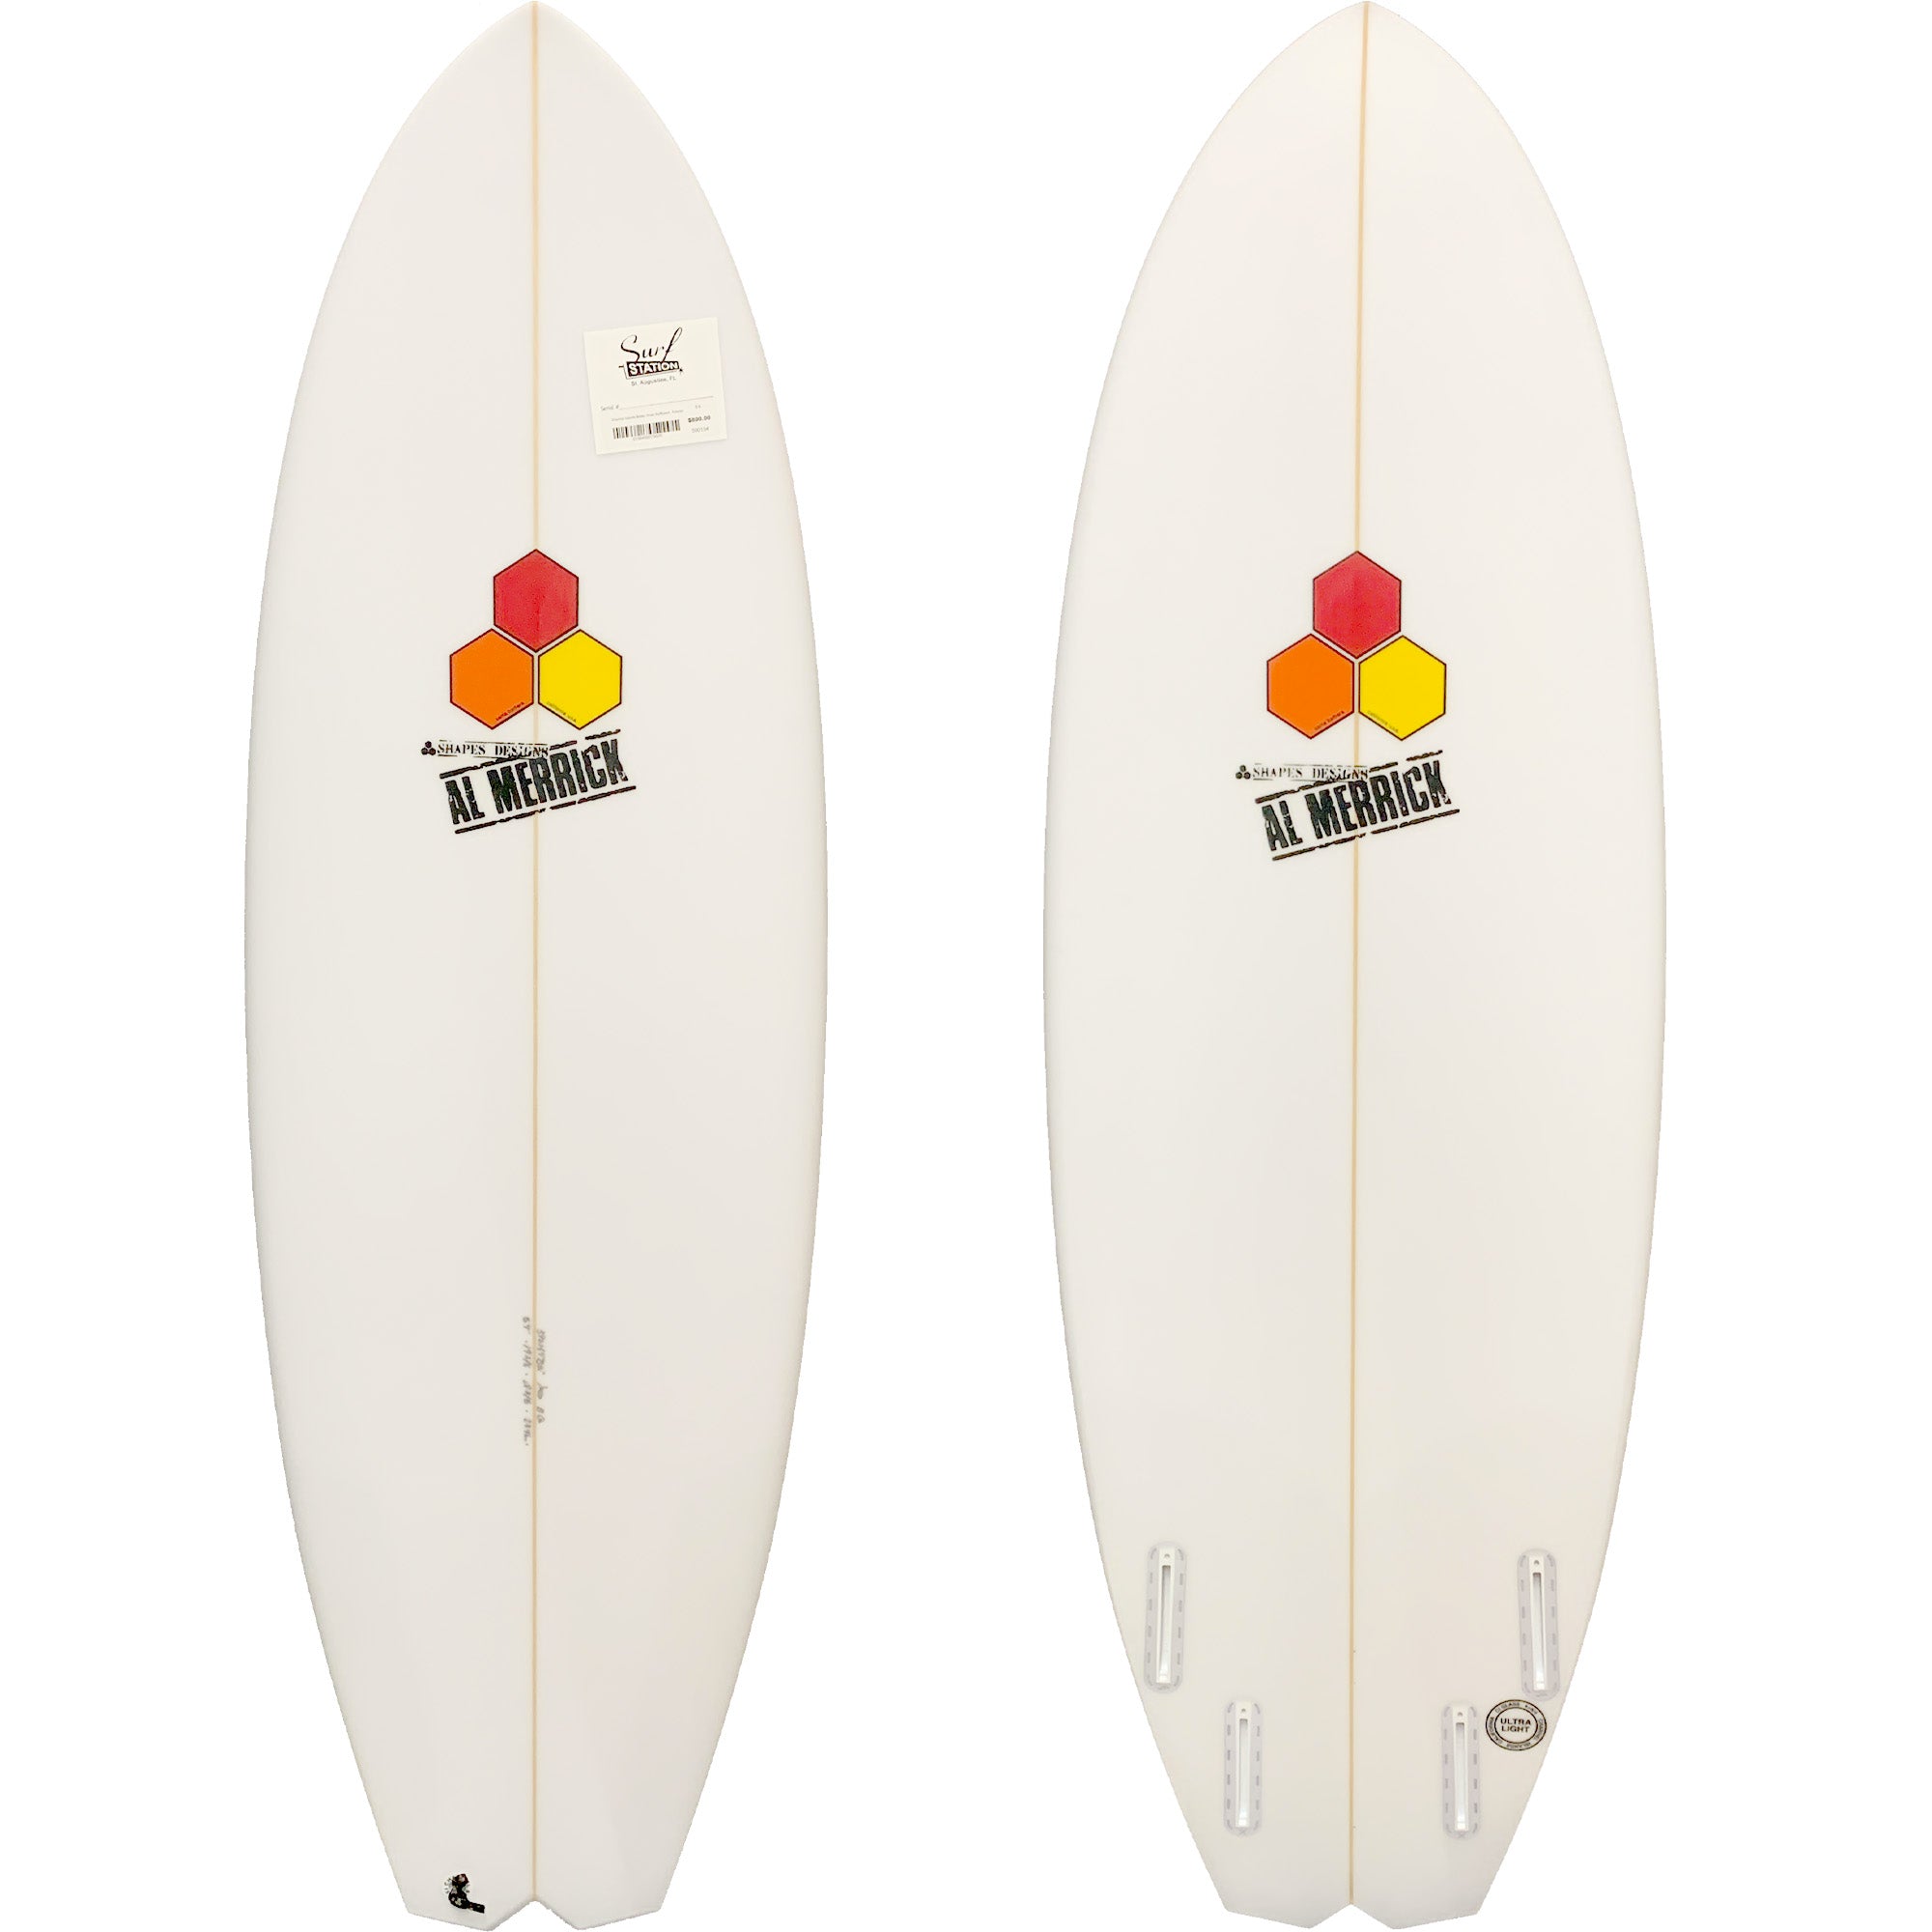 Channel Islands Bobby Quad Surfboard - Futures